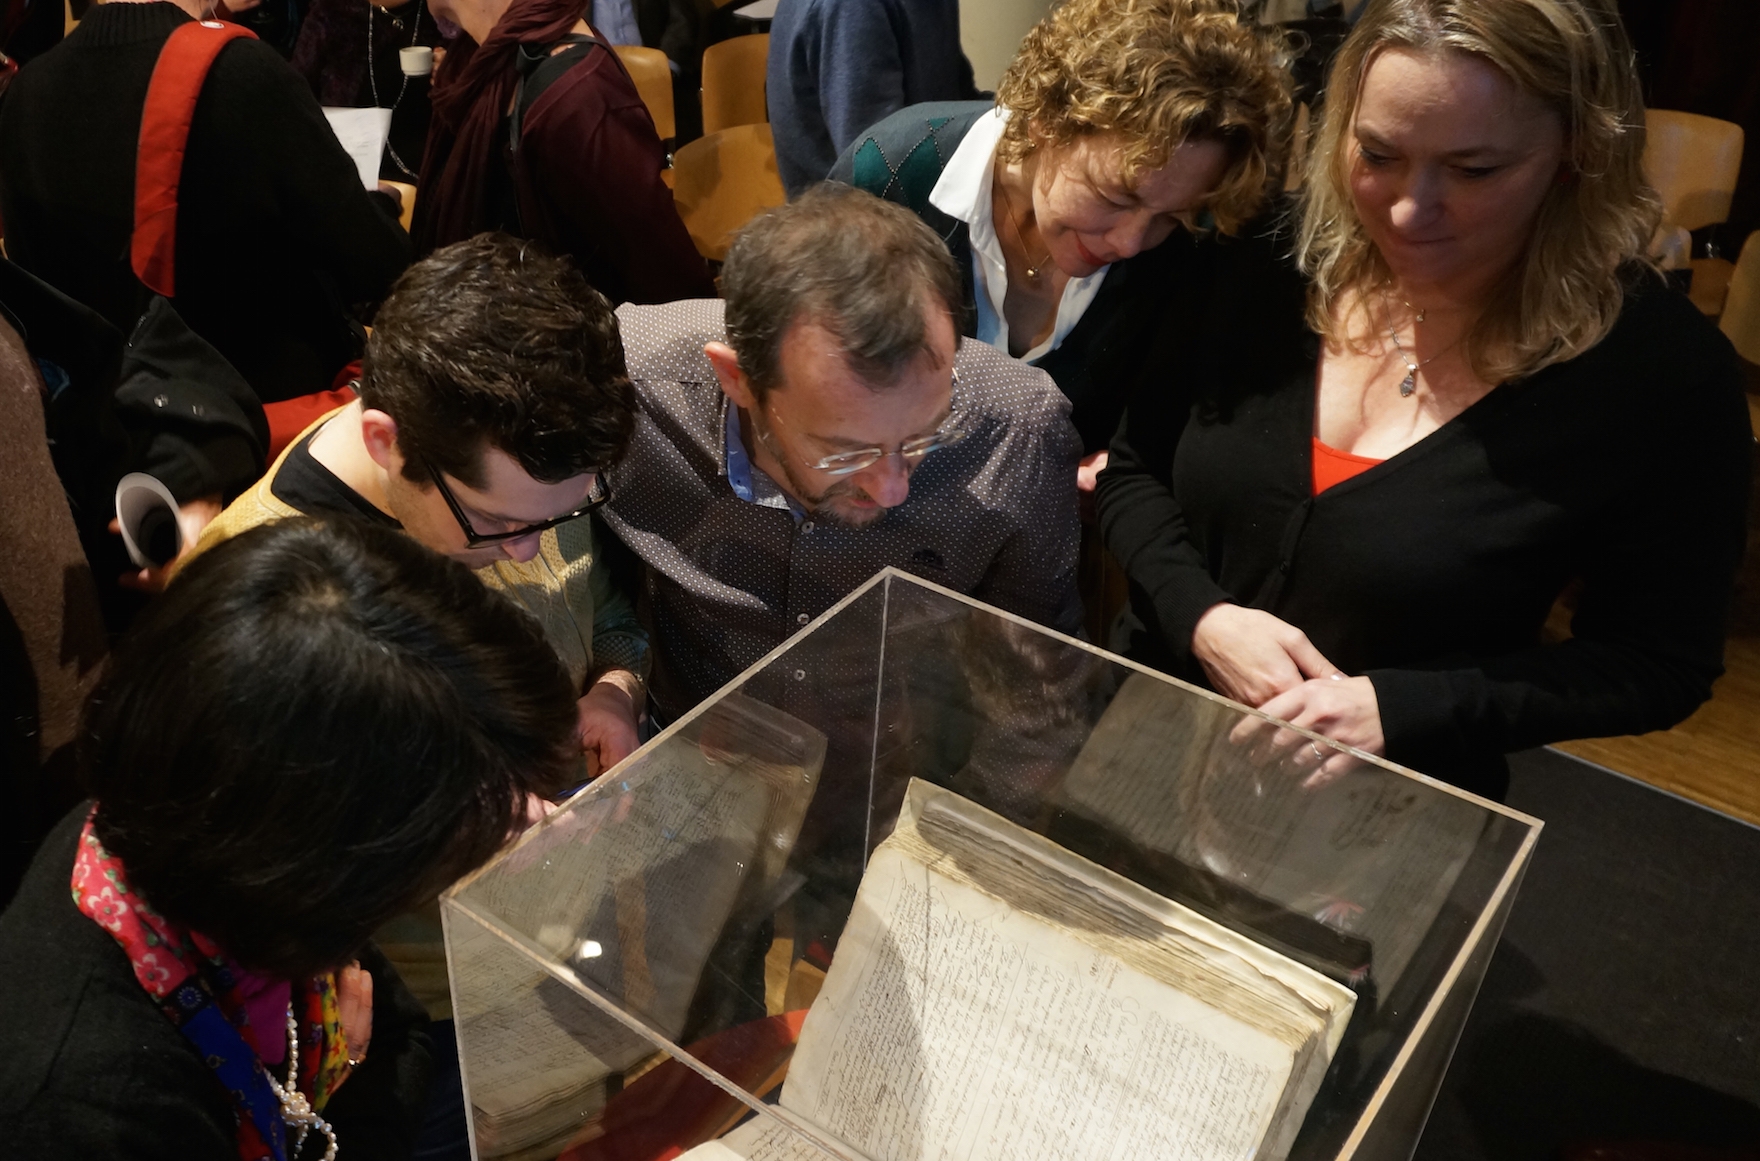 Attendees at an Amsterdam symposium on whether to lift the ancient order of excommunication against the philosopher Baruch Spinoza examining a copy of the original writ against him, Dec. 6, 2015. (Cnaan Liphshiz)